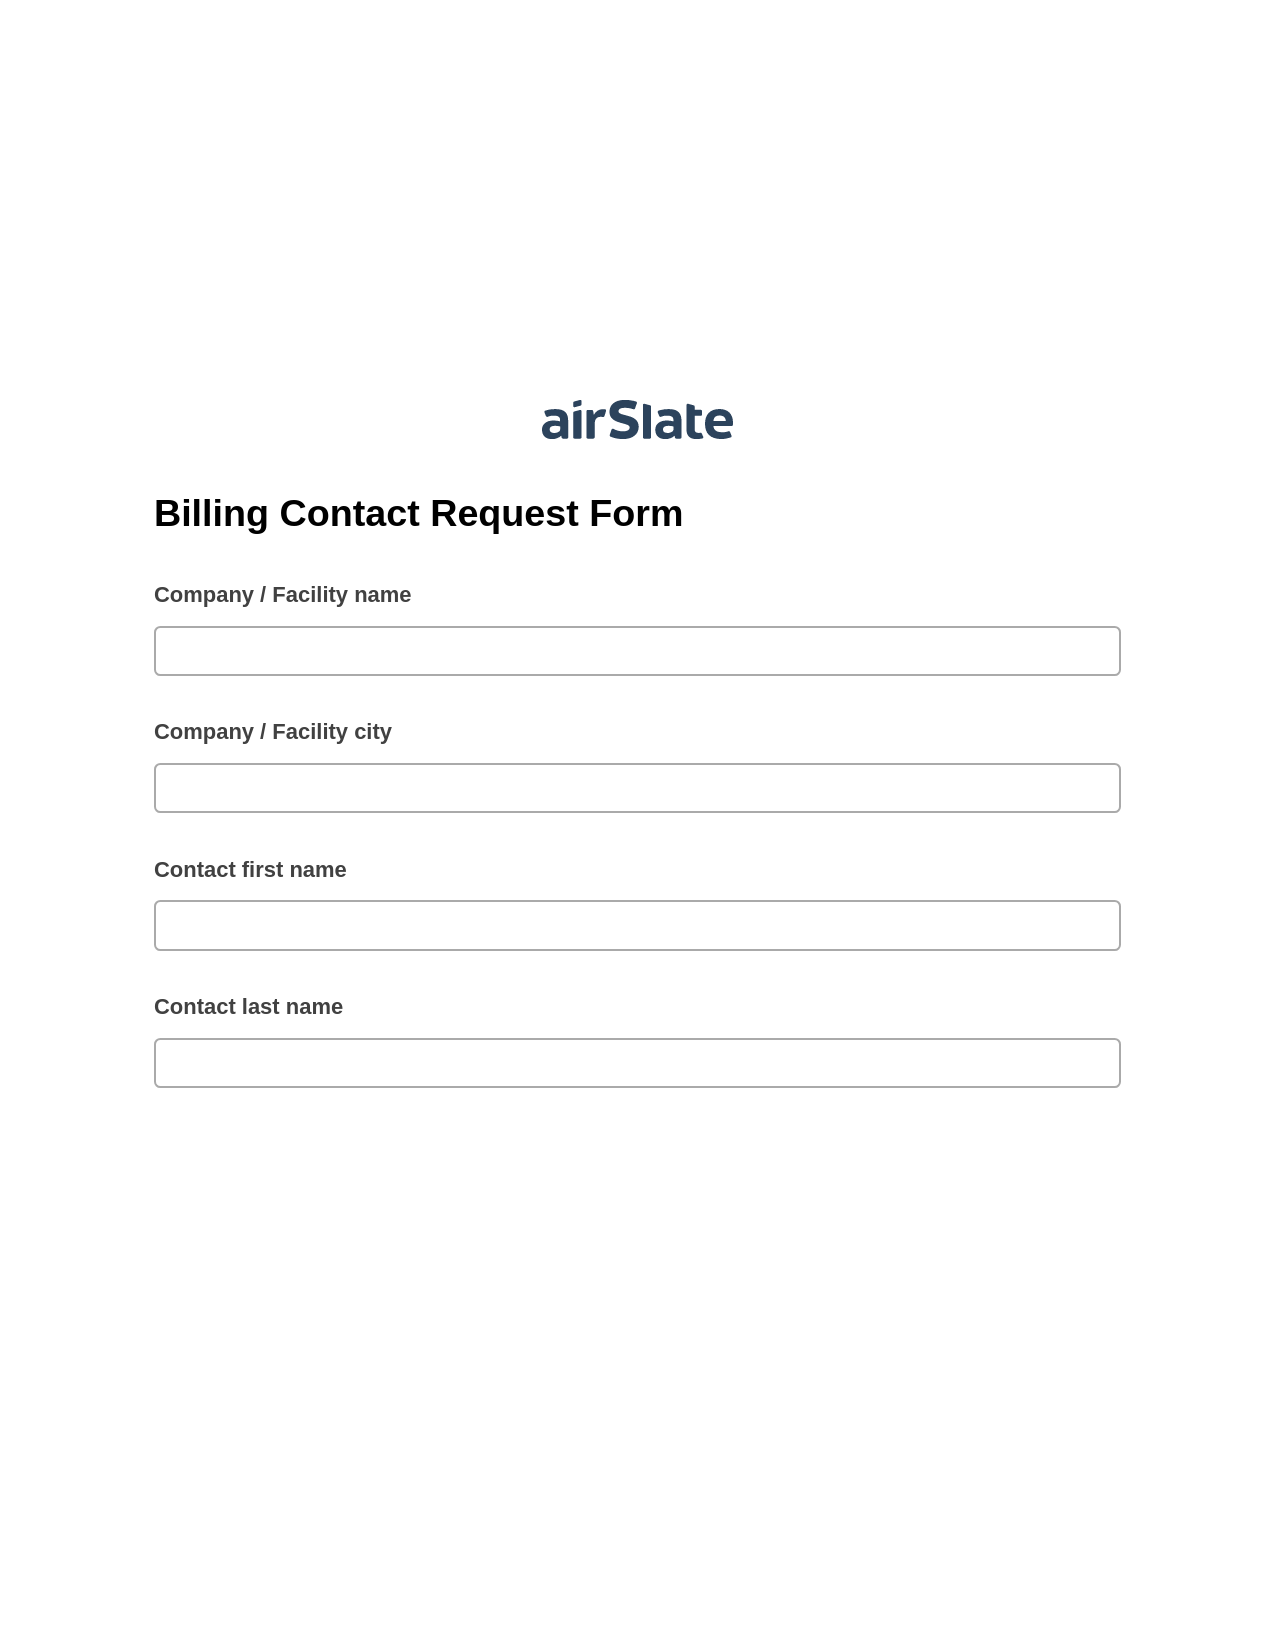 Multirole Billing Contact Request Form Pre-fill from CSV File Bot, Google Sheet Two-Way Binding Bot, Box Bot